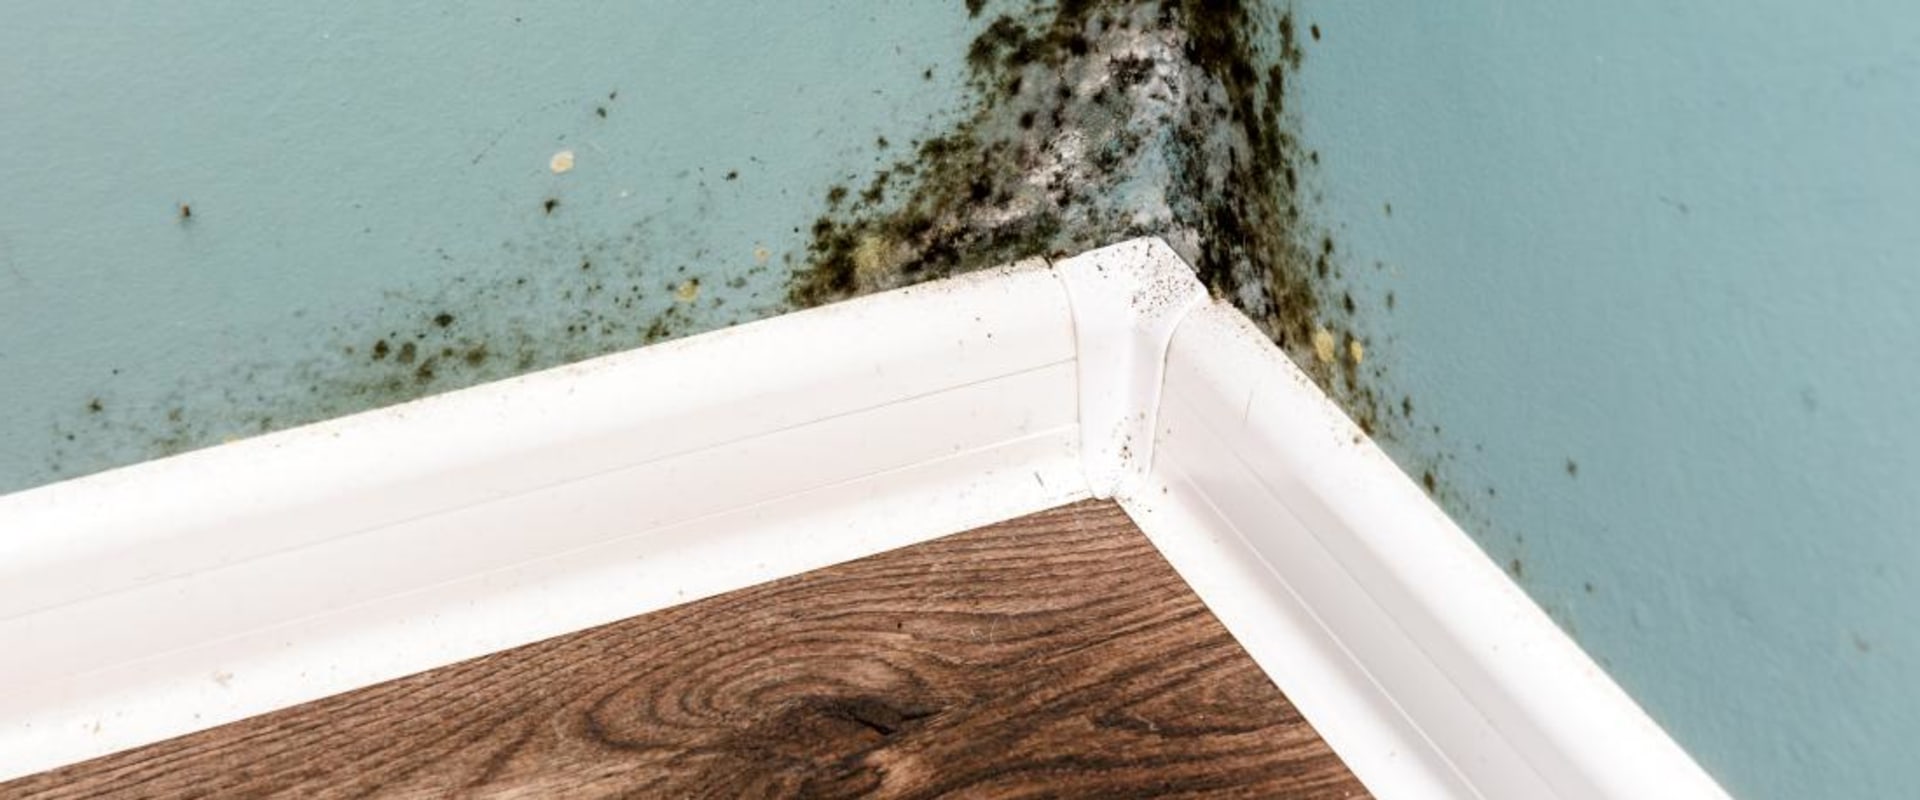 Can You Live Safely in a House with Mold?